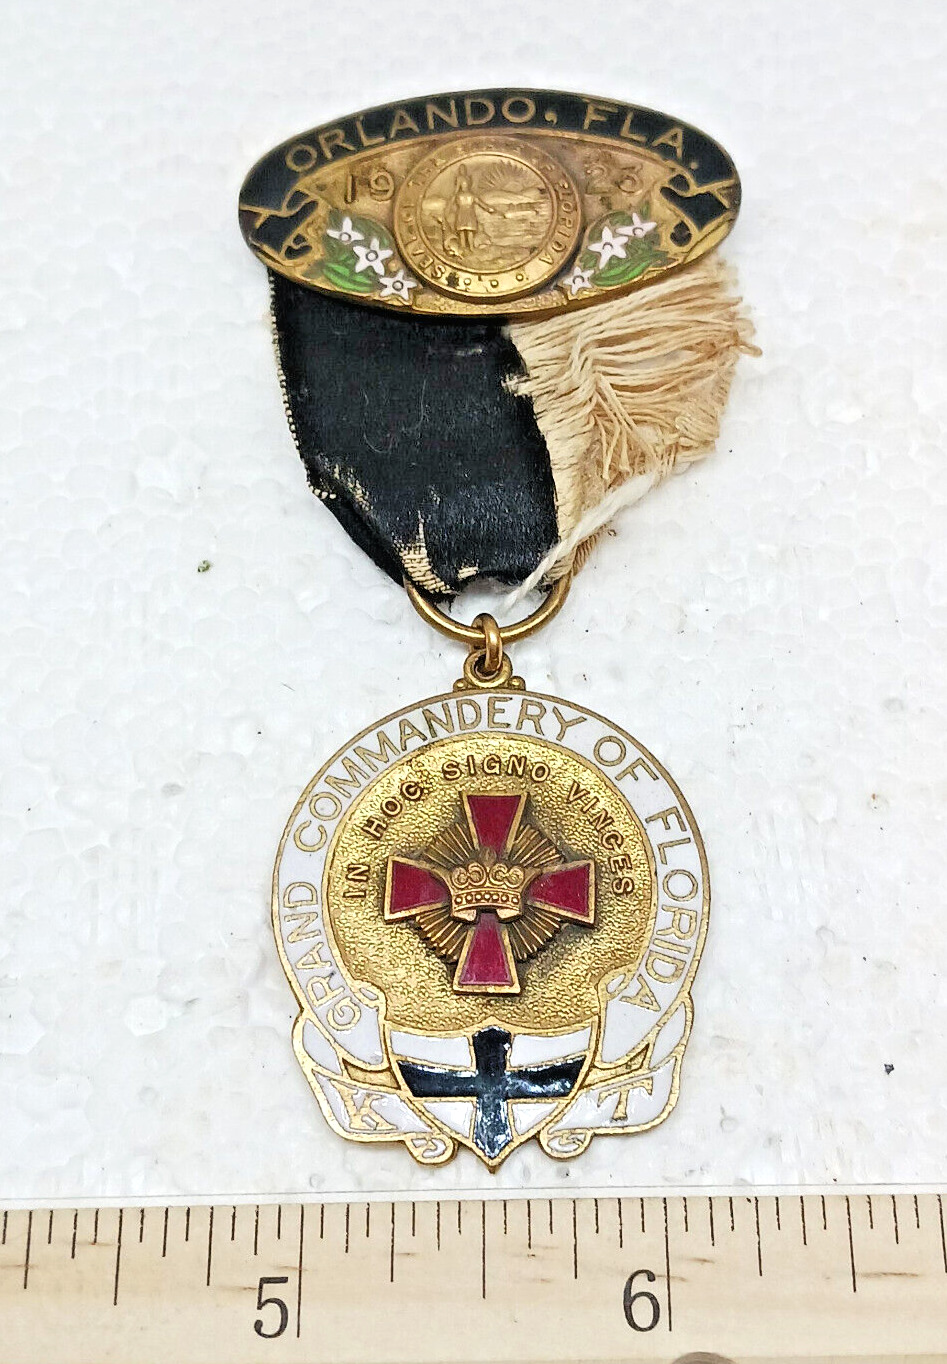 Antique 1923 Knights Templar Grand Commadery of Florida Medal